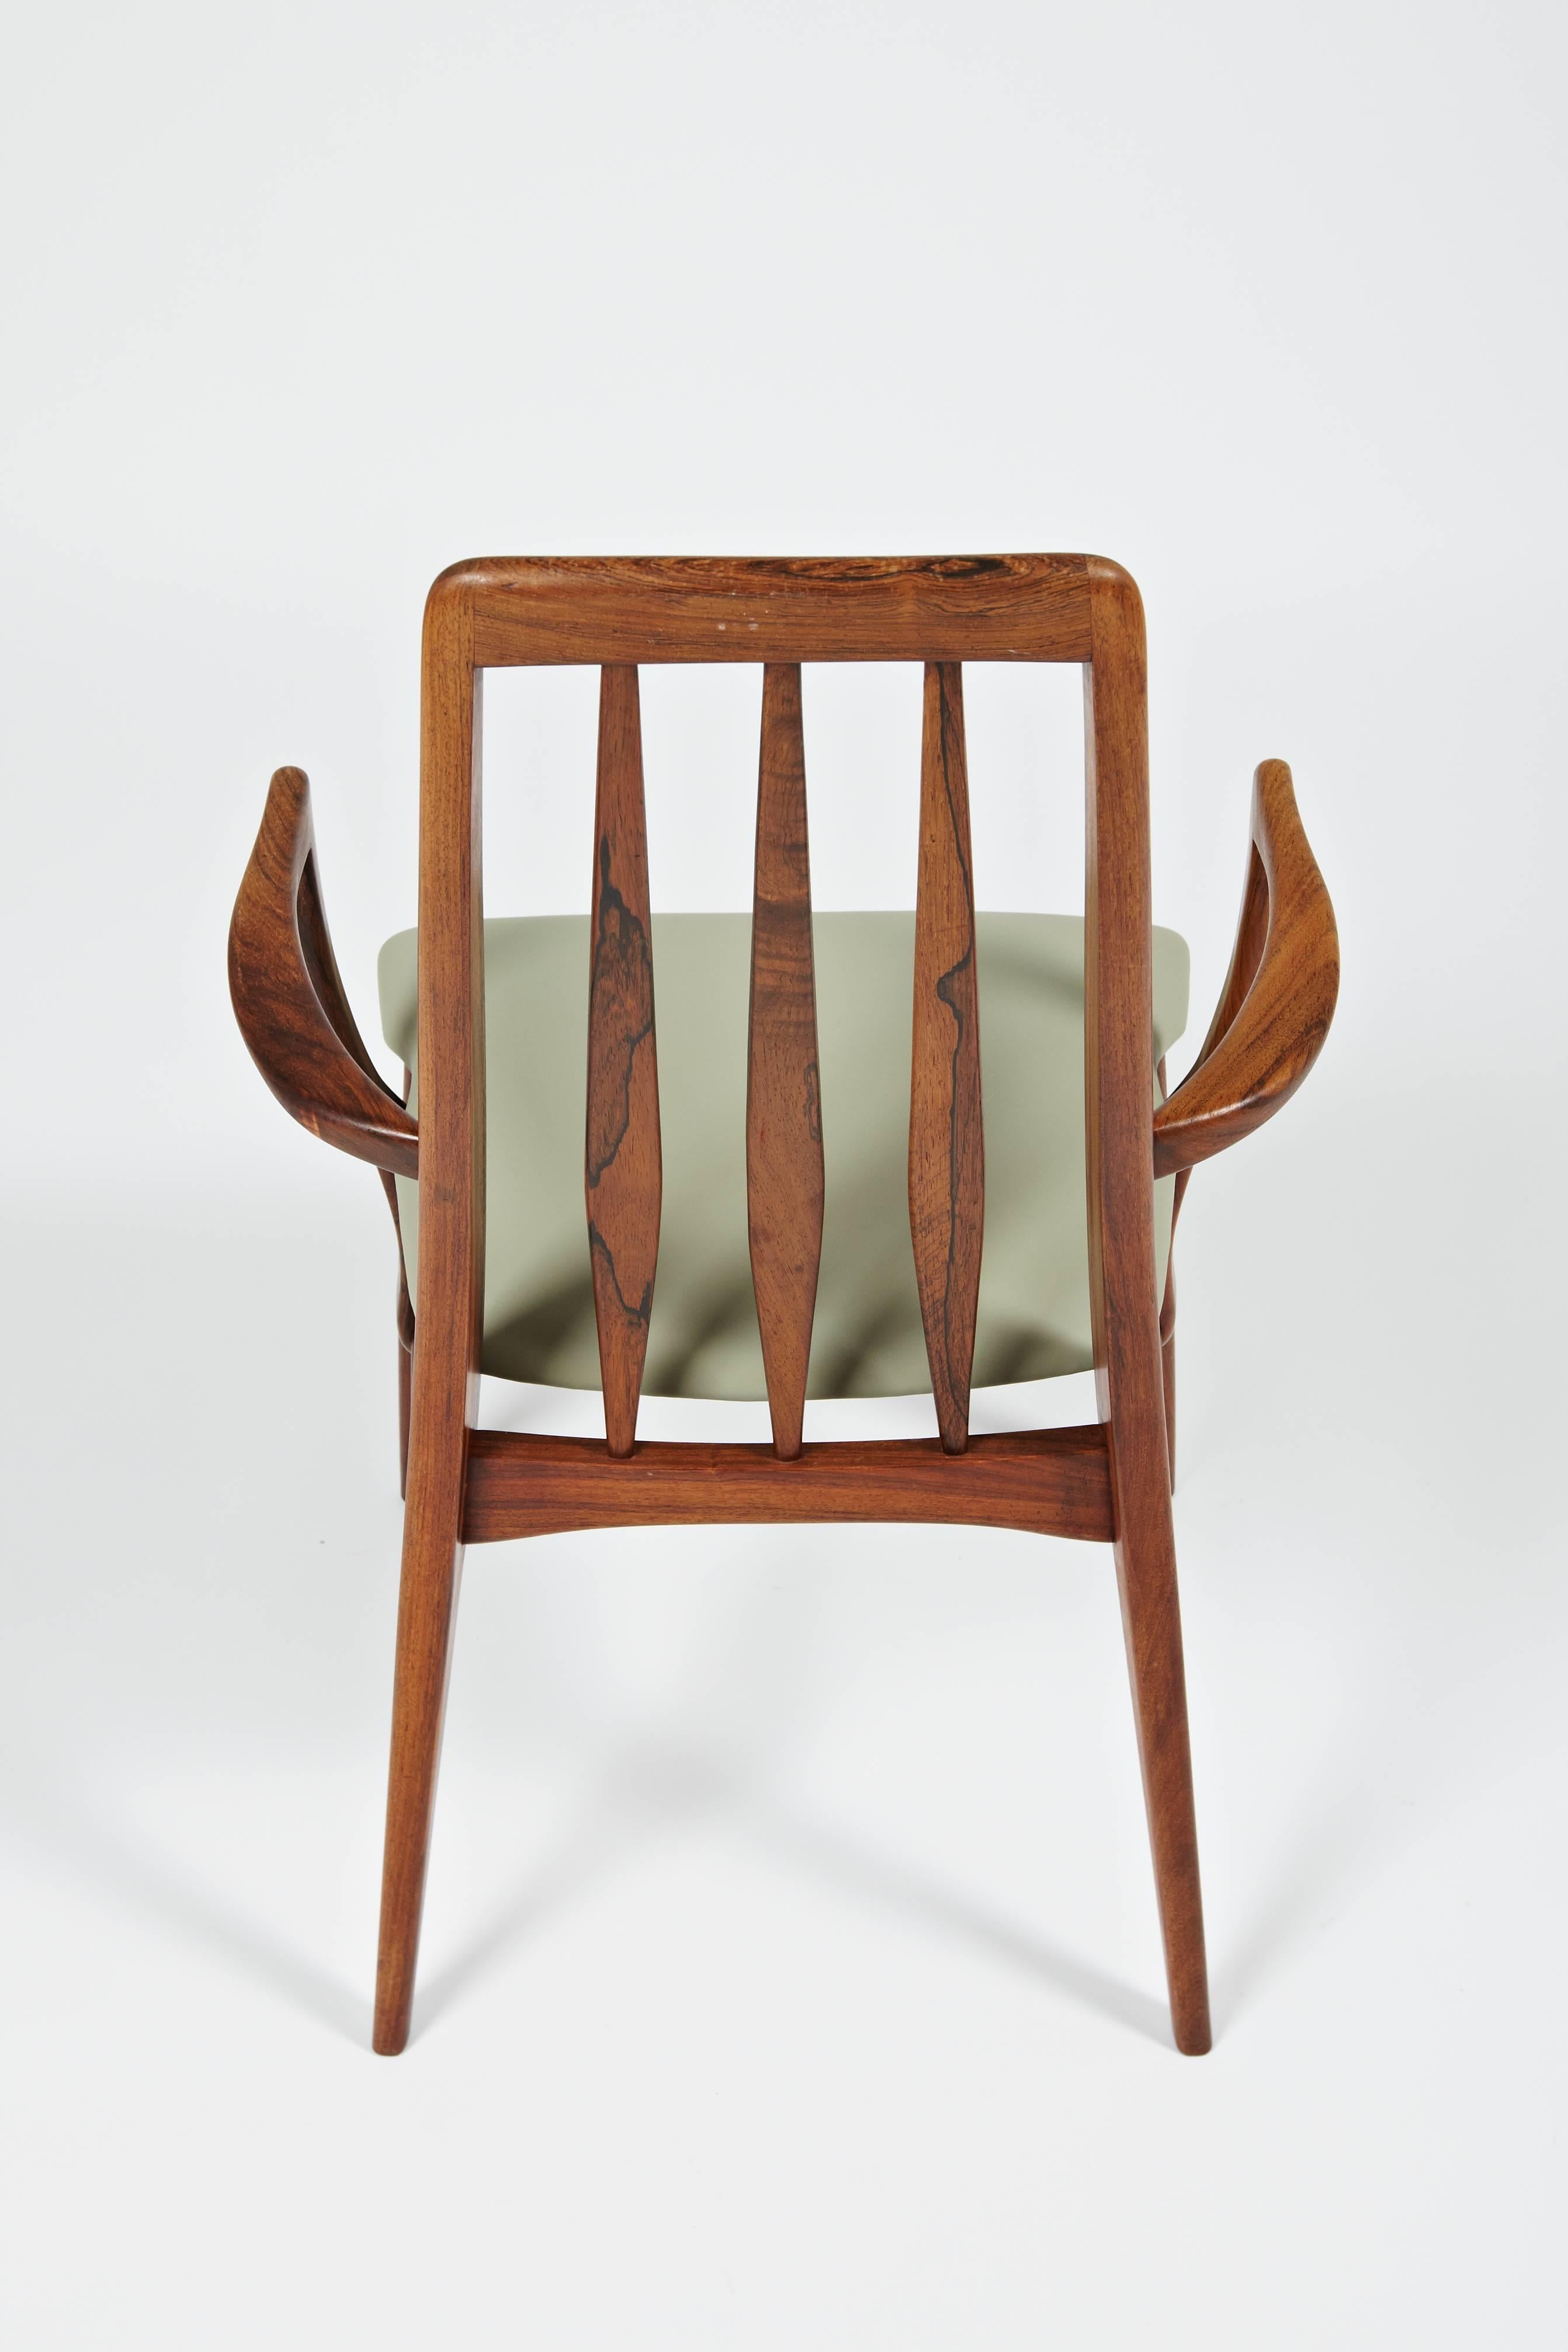 Niels Kofoed Rosewood Dining Chair with Arms, circa 1964 For Sale 3